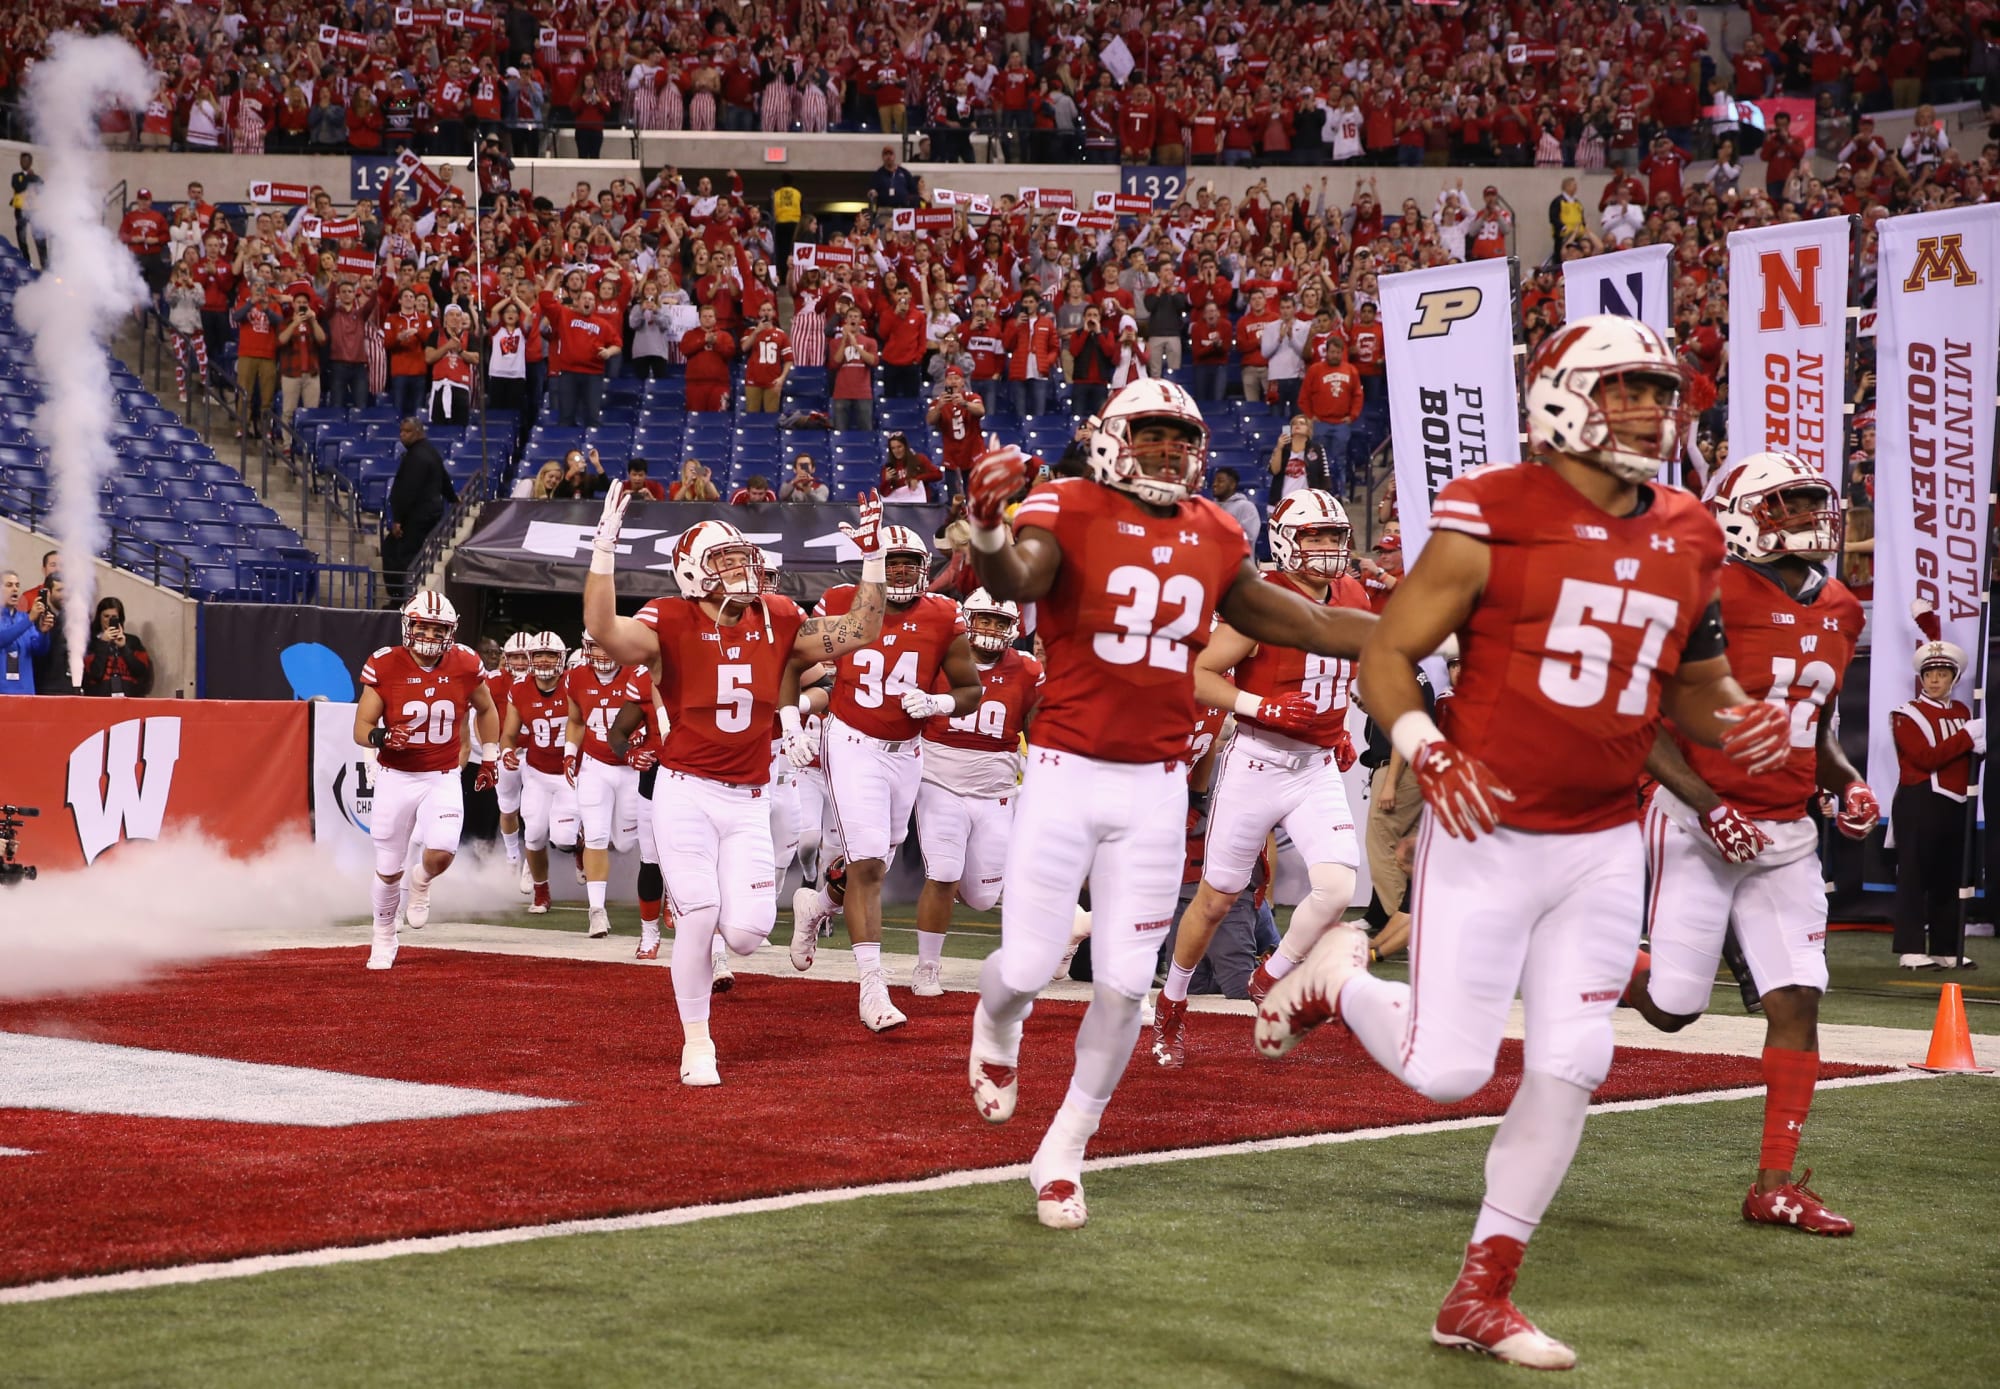 CBS says 2017 was best team in Wisconsin Football history